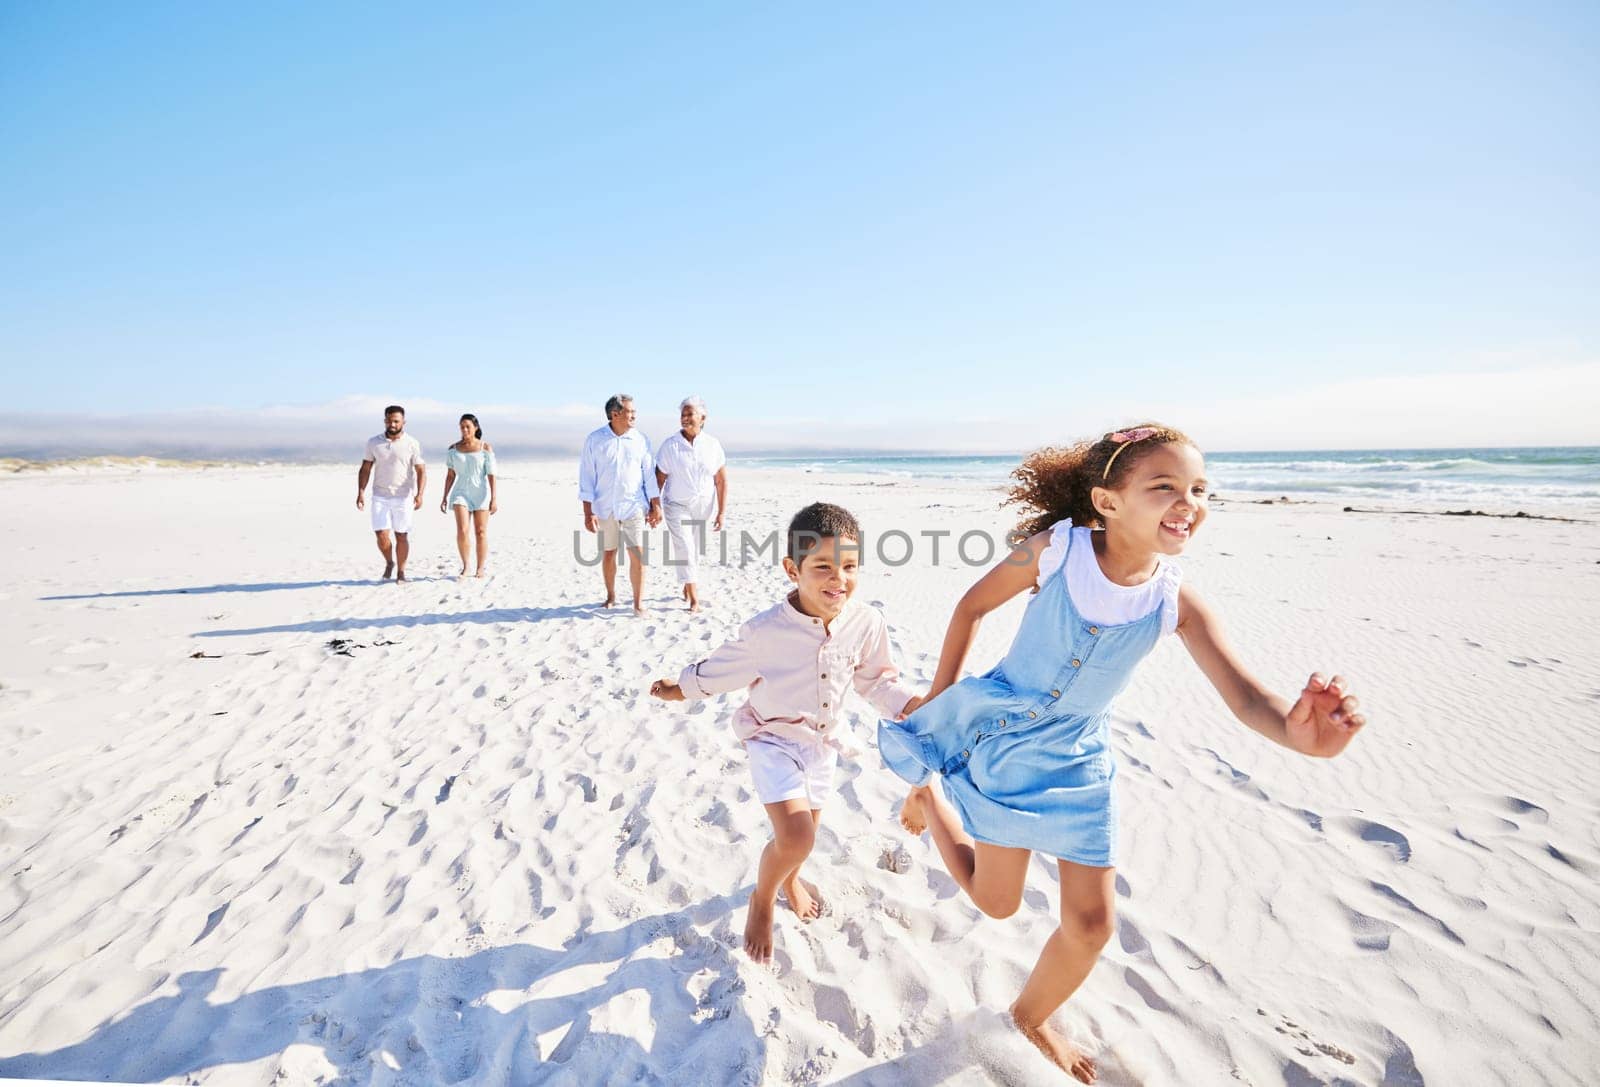 Excited, beach or happy children running or playing in summer with happiness or joy in nature. Kids, lovely girl or young boy bonding with a happy girl or playful sister walking as a family together.